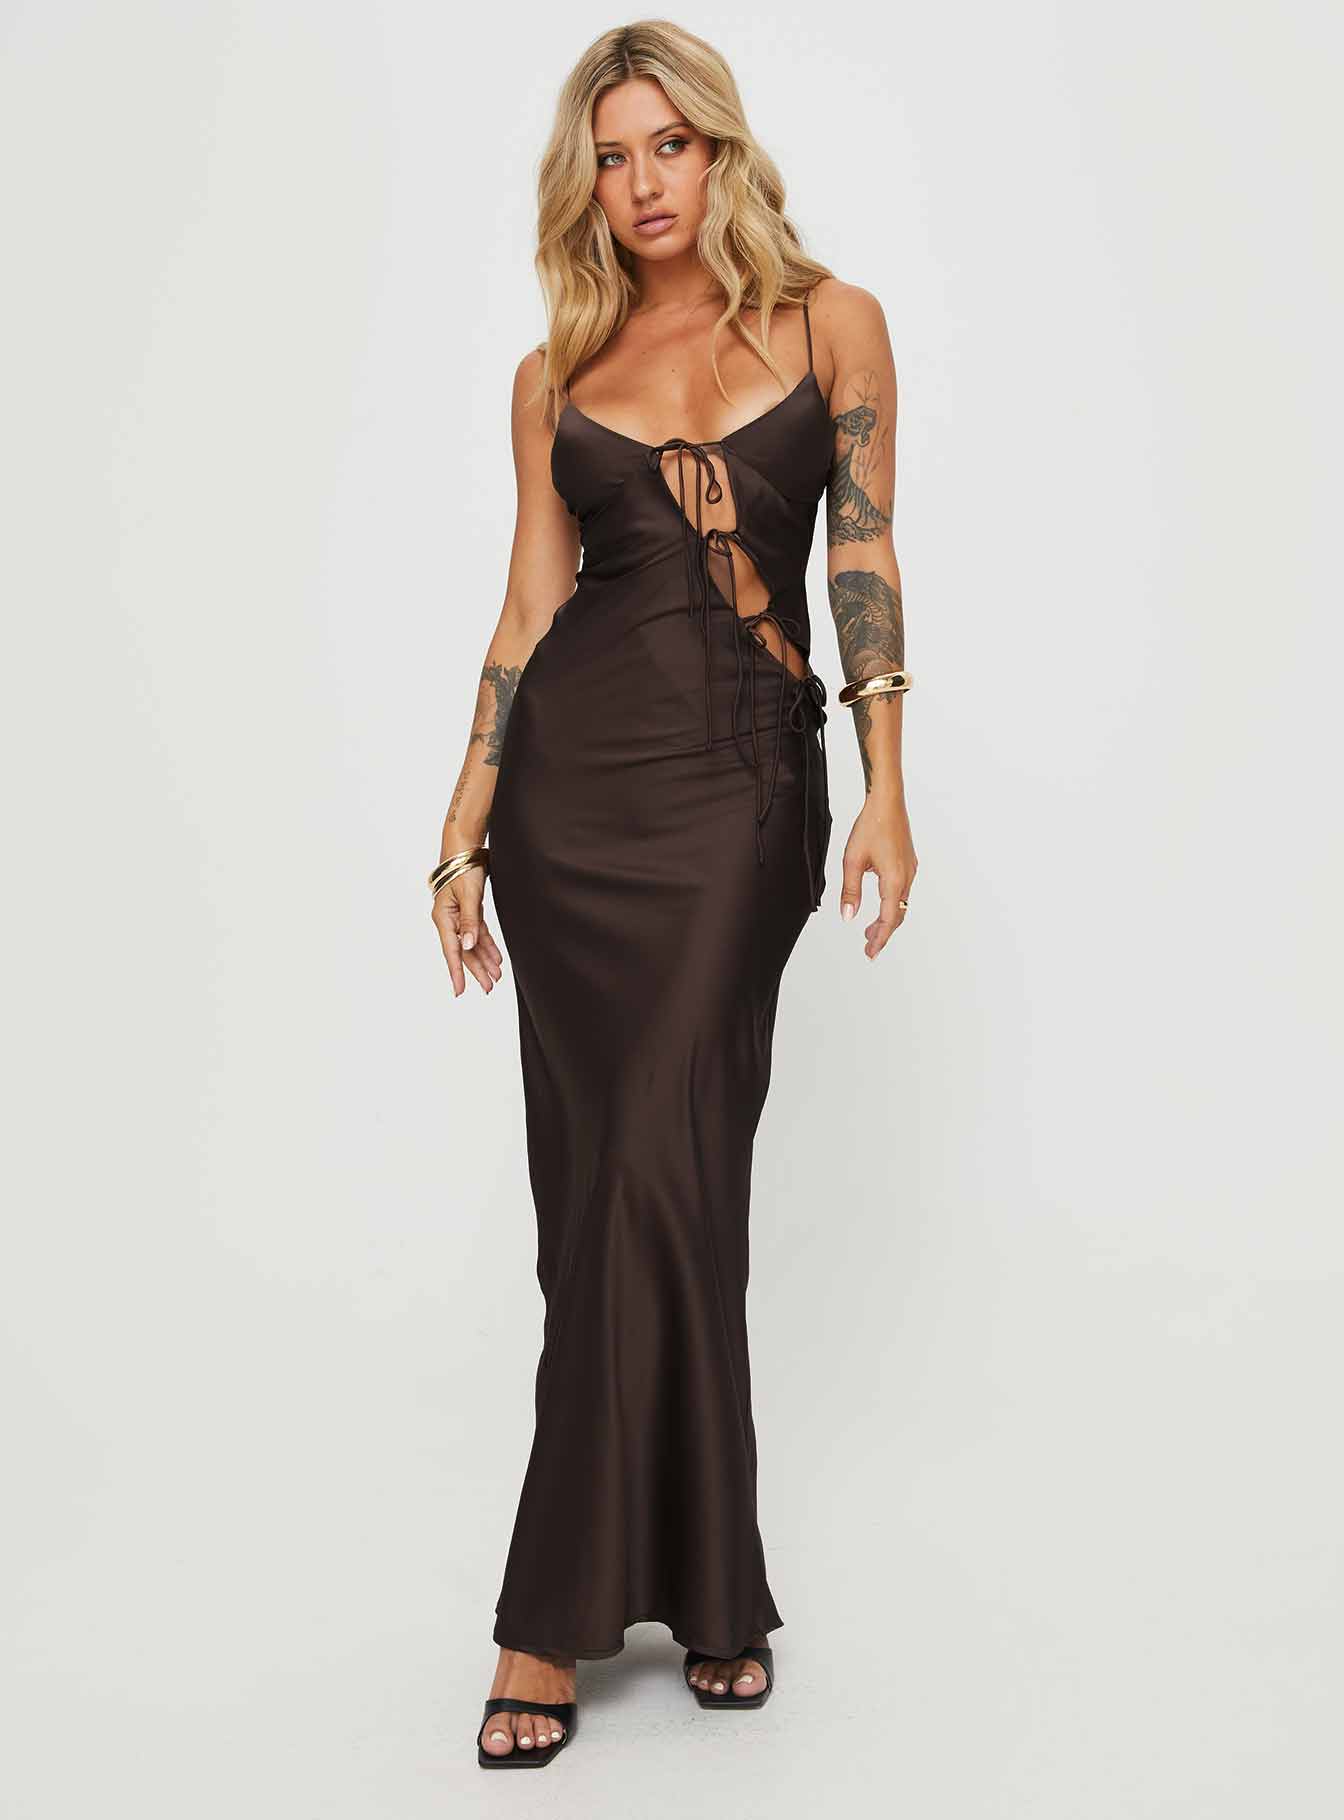 About A Girl Maxi Dress Chocolate